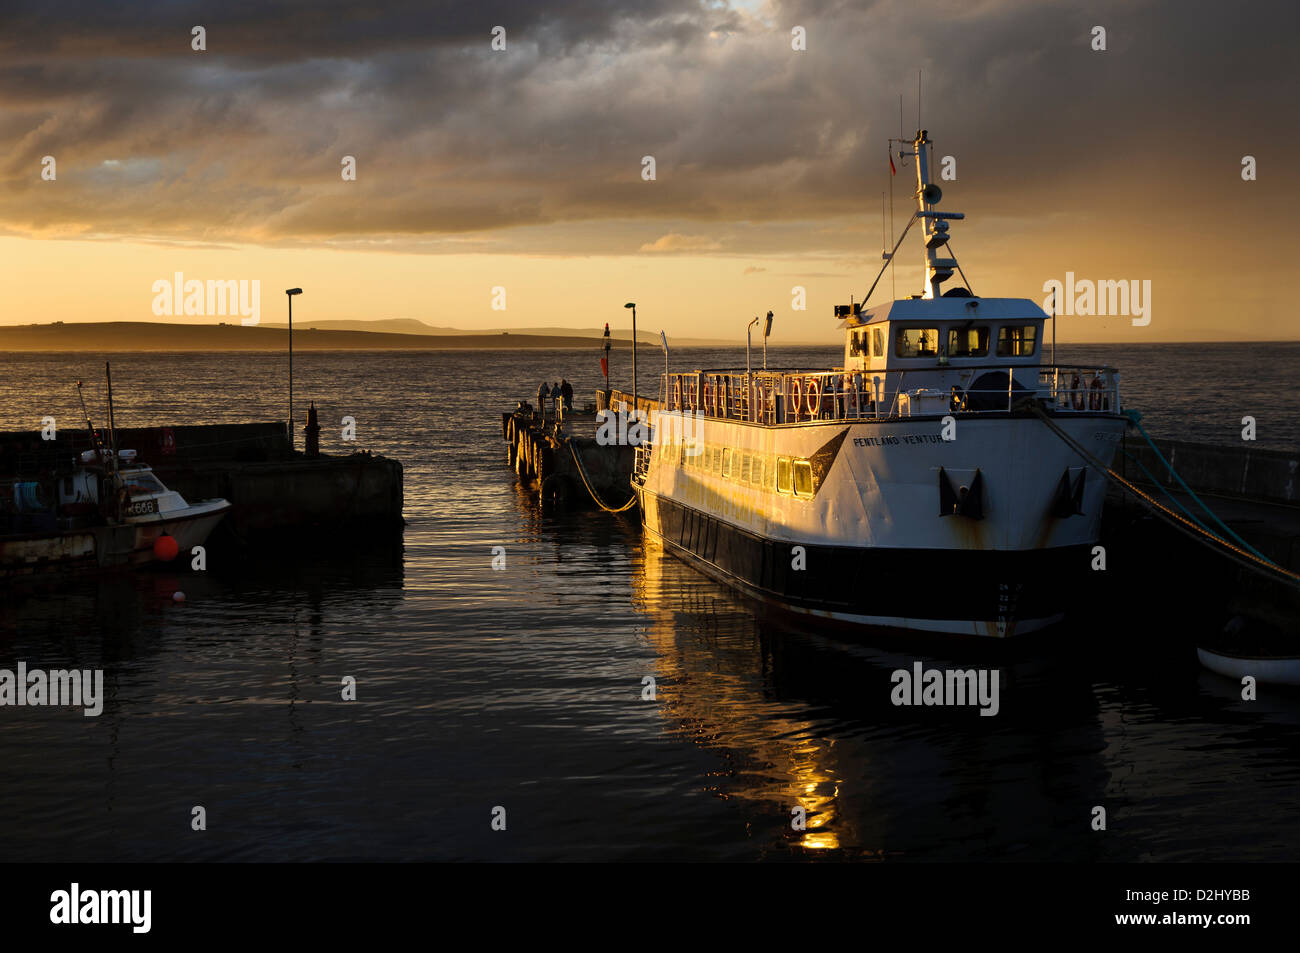 The passenger ferry Pentland Venture moored in the harbour at John o' Groats at sunset. Caithness, Scotland. August. Stock Photo